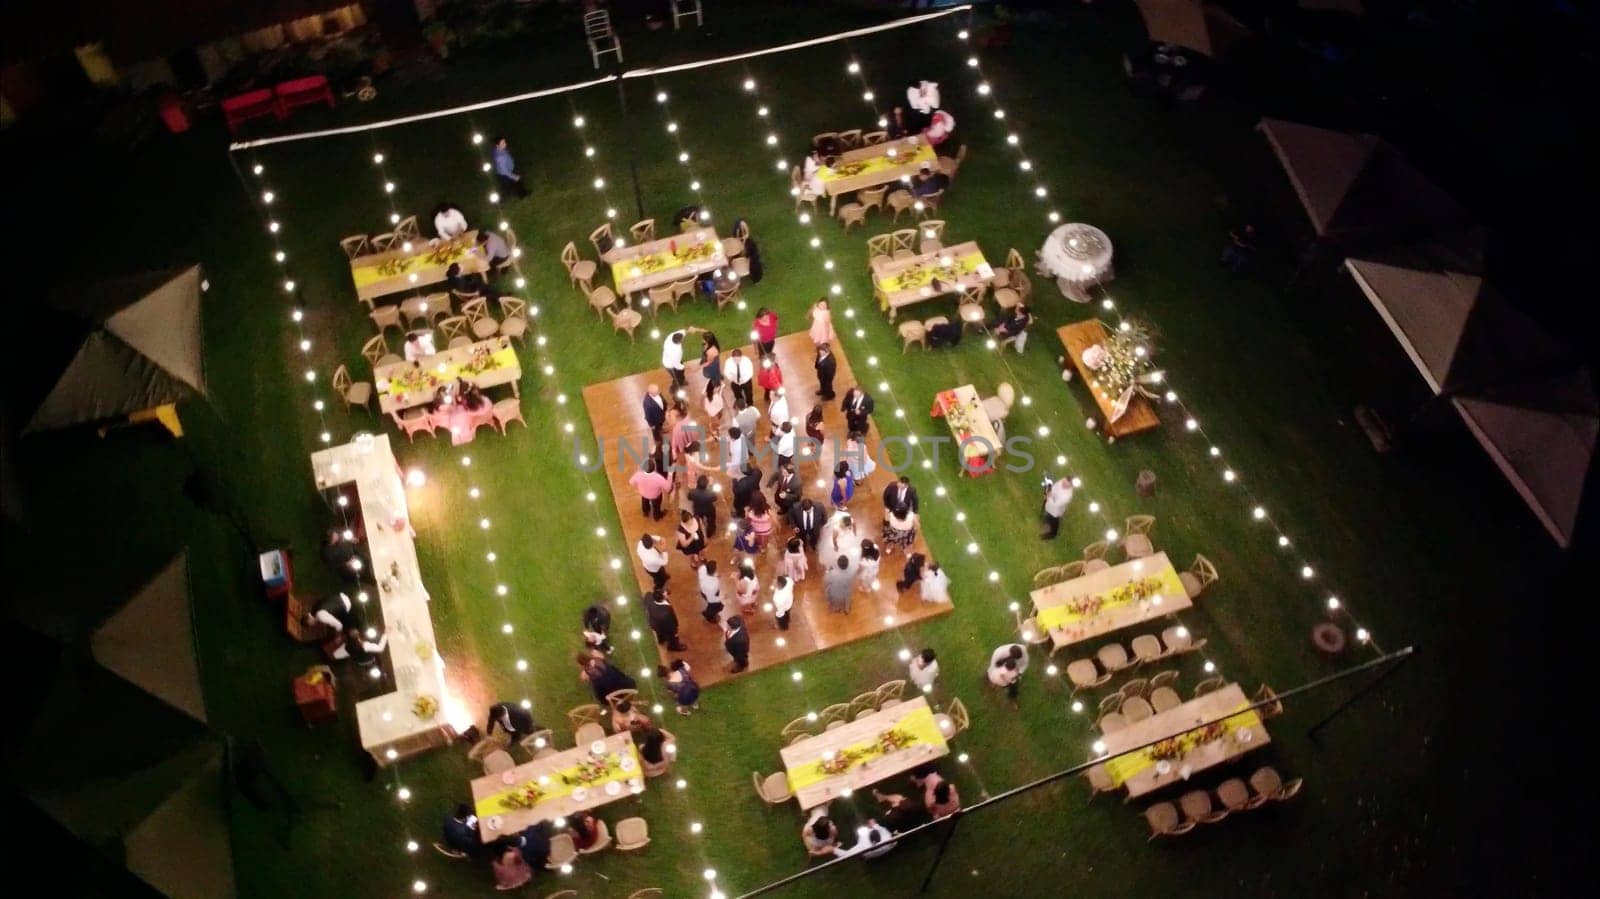 Outdoor evening event from above by Peruphotoart